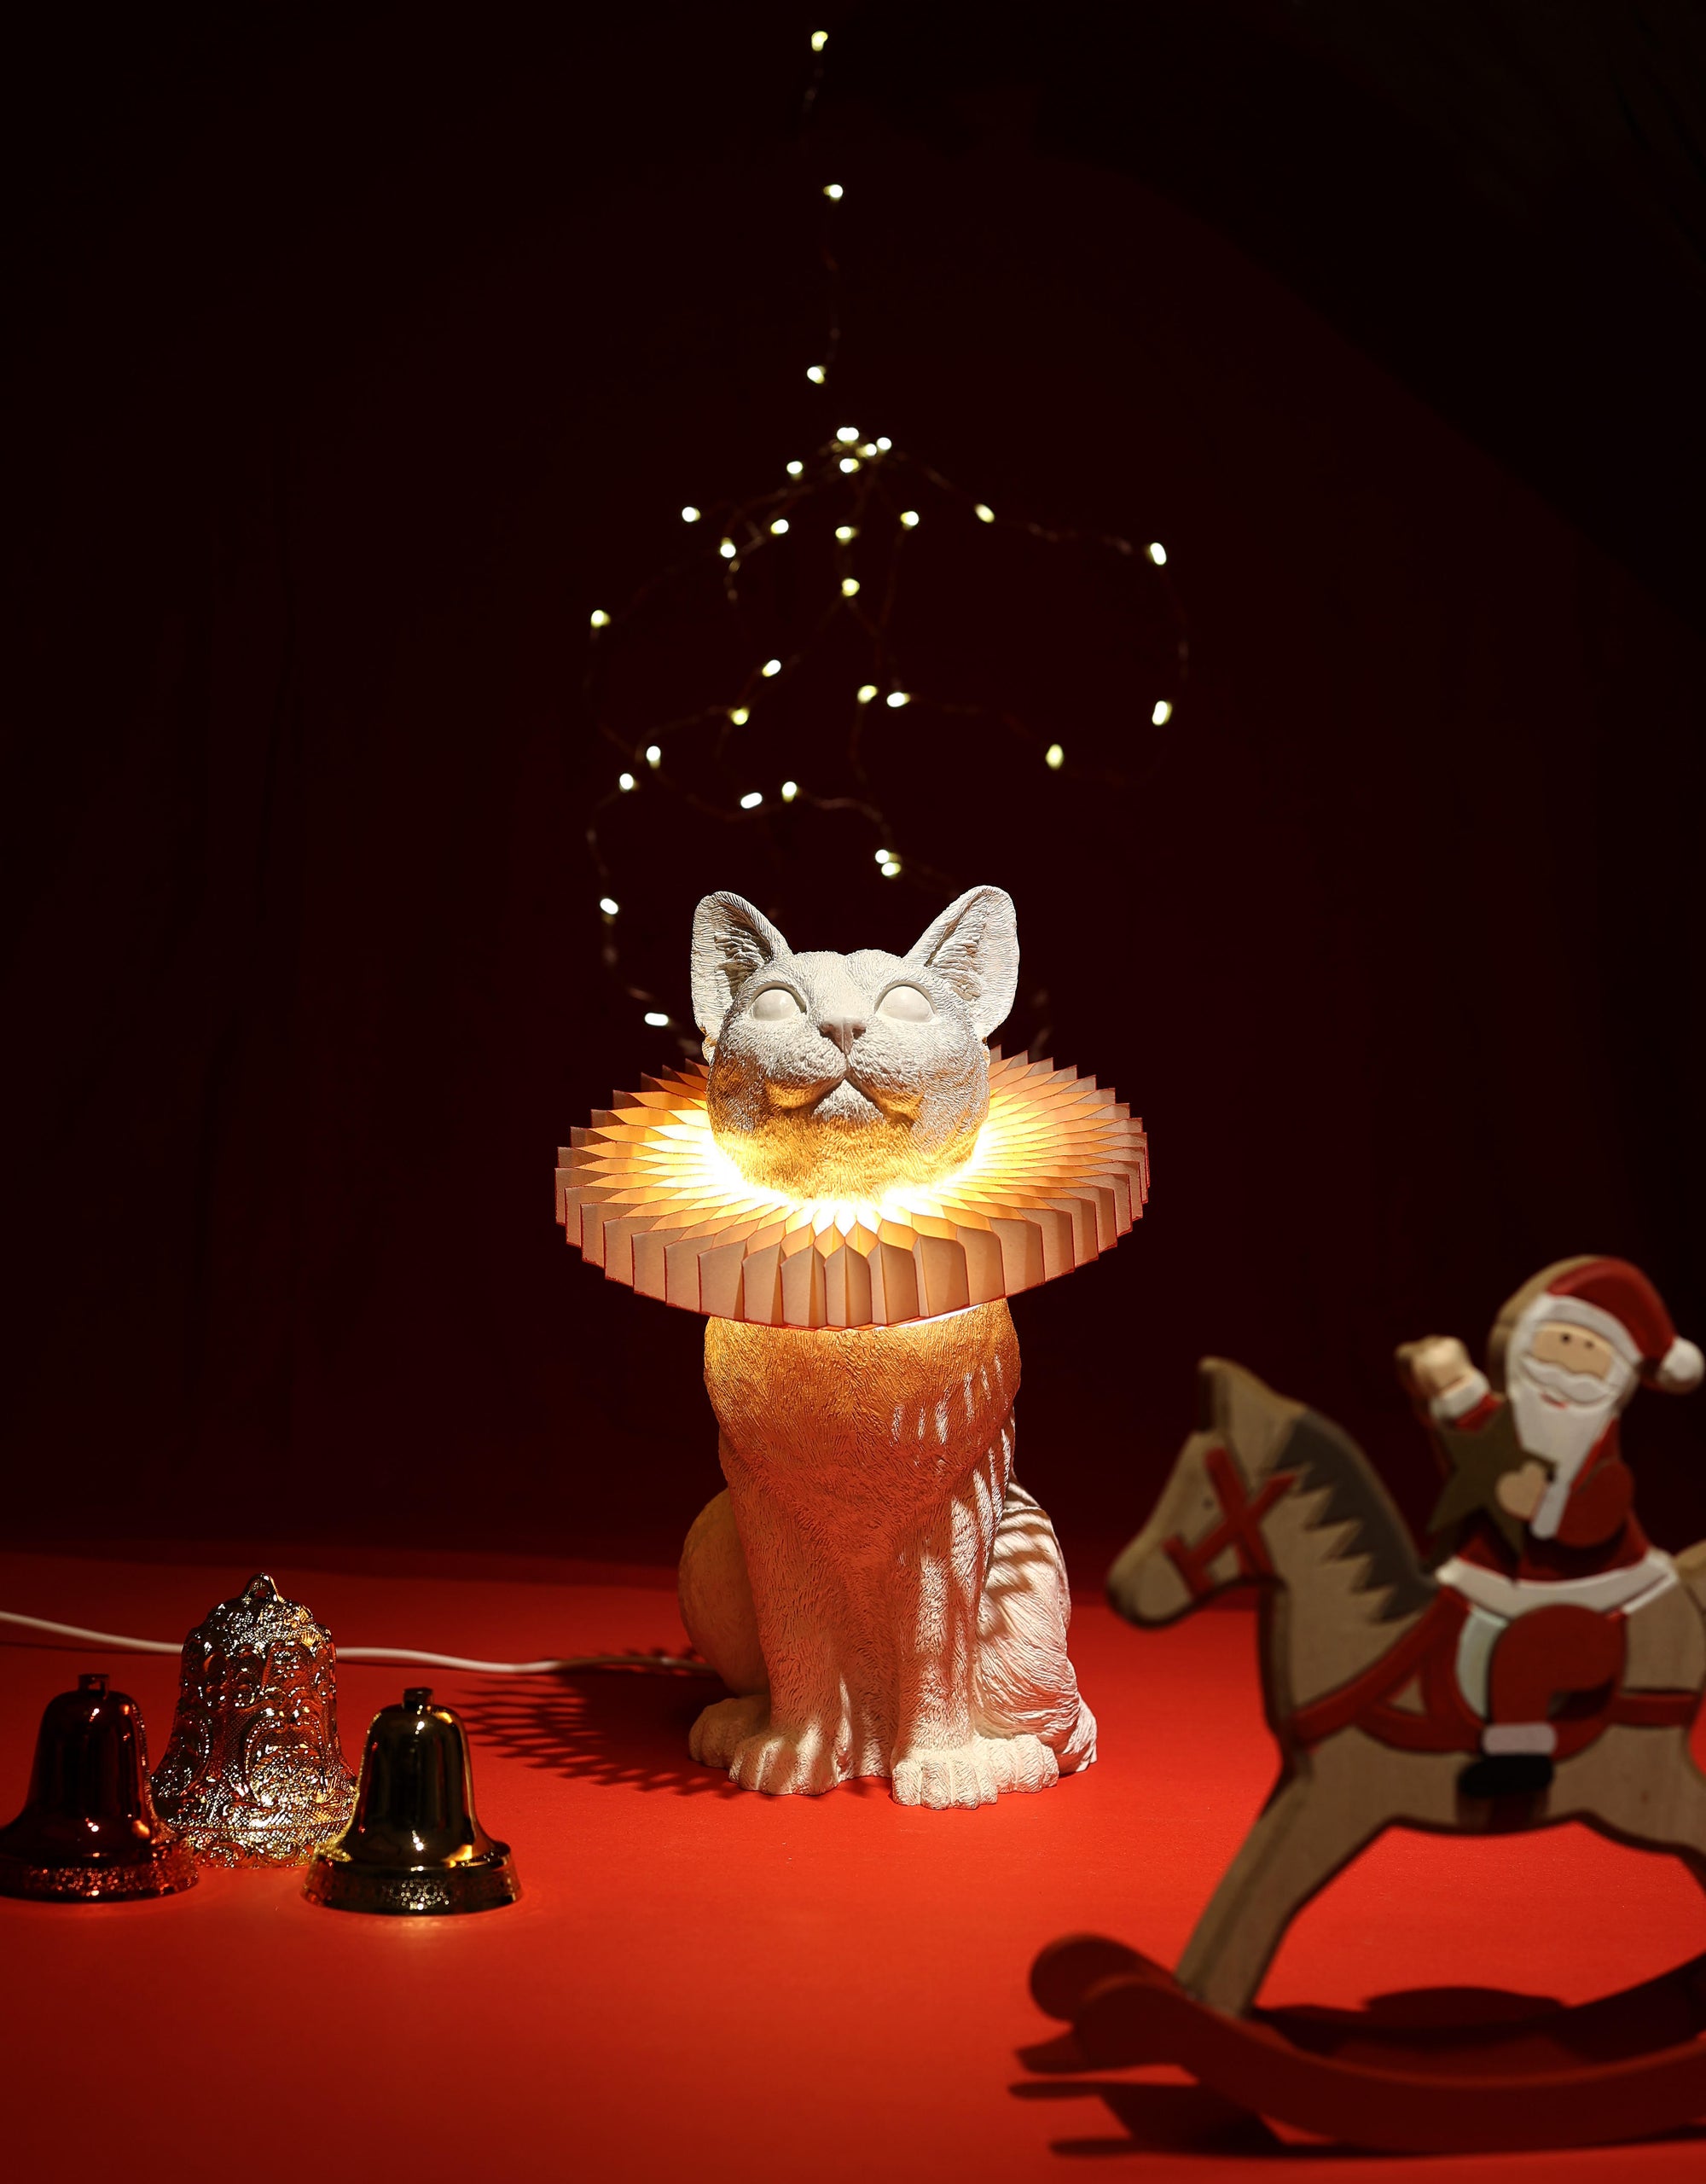 Light up your Christmas decoration with this cute Cat Lamp